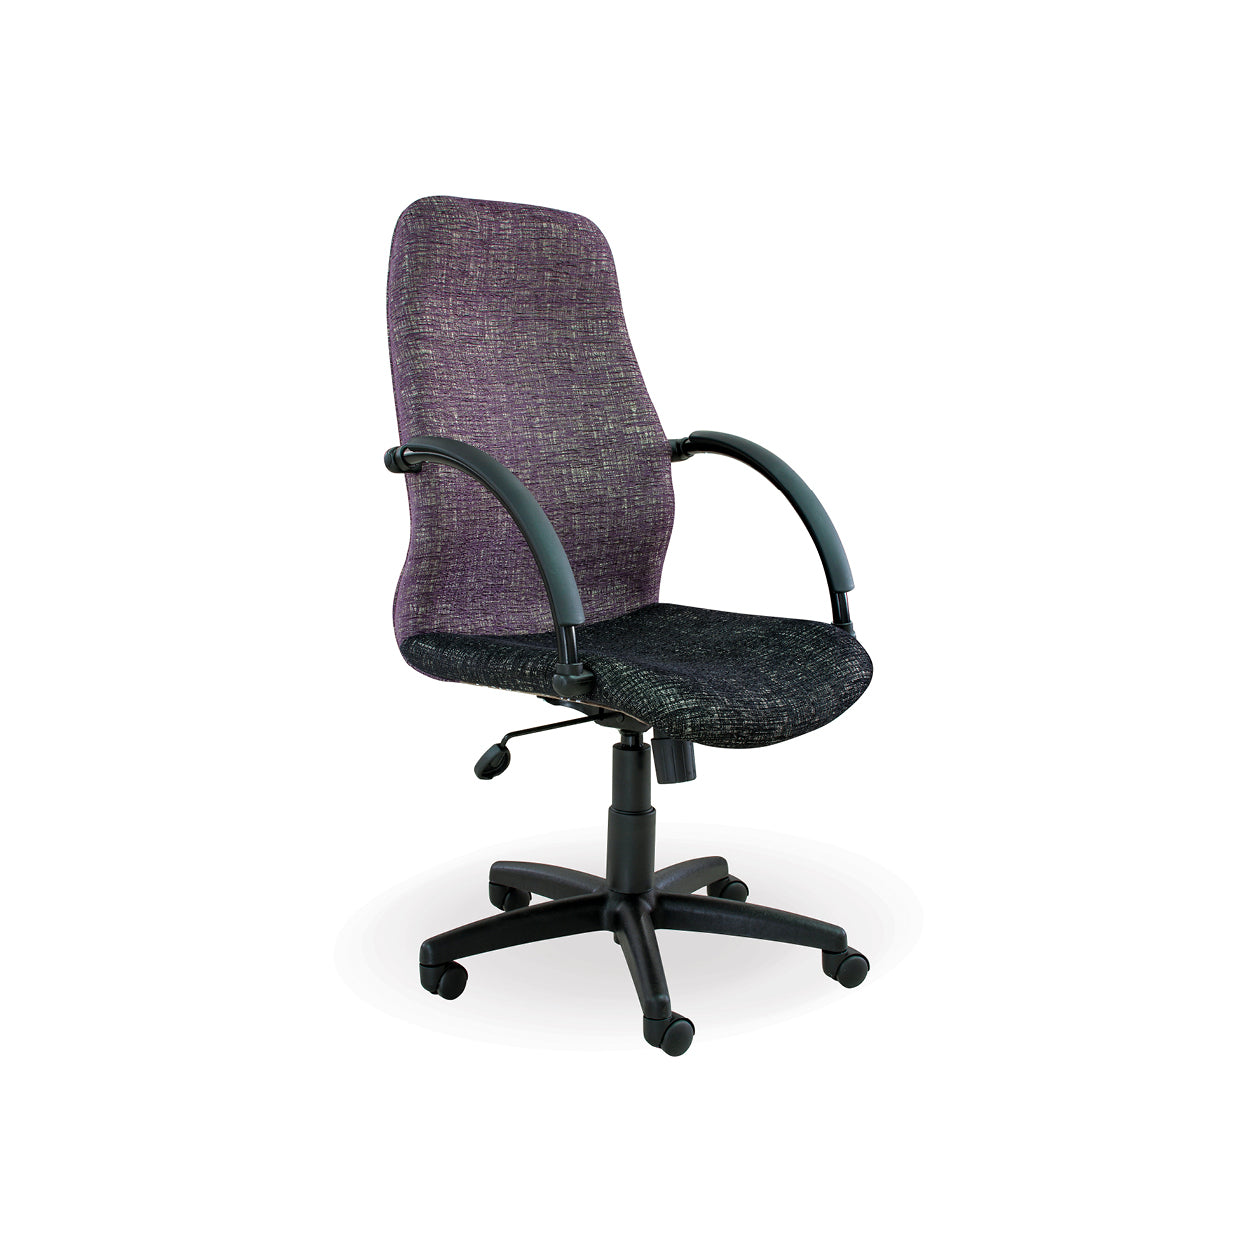 Hedcor office chair